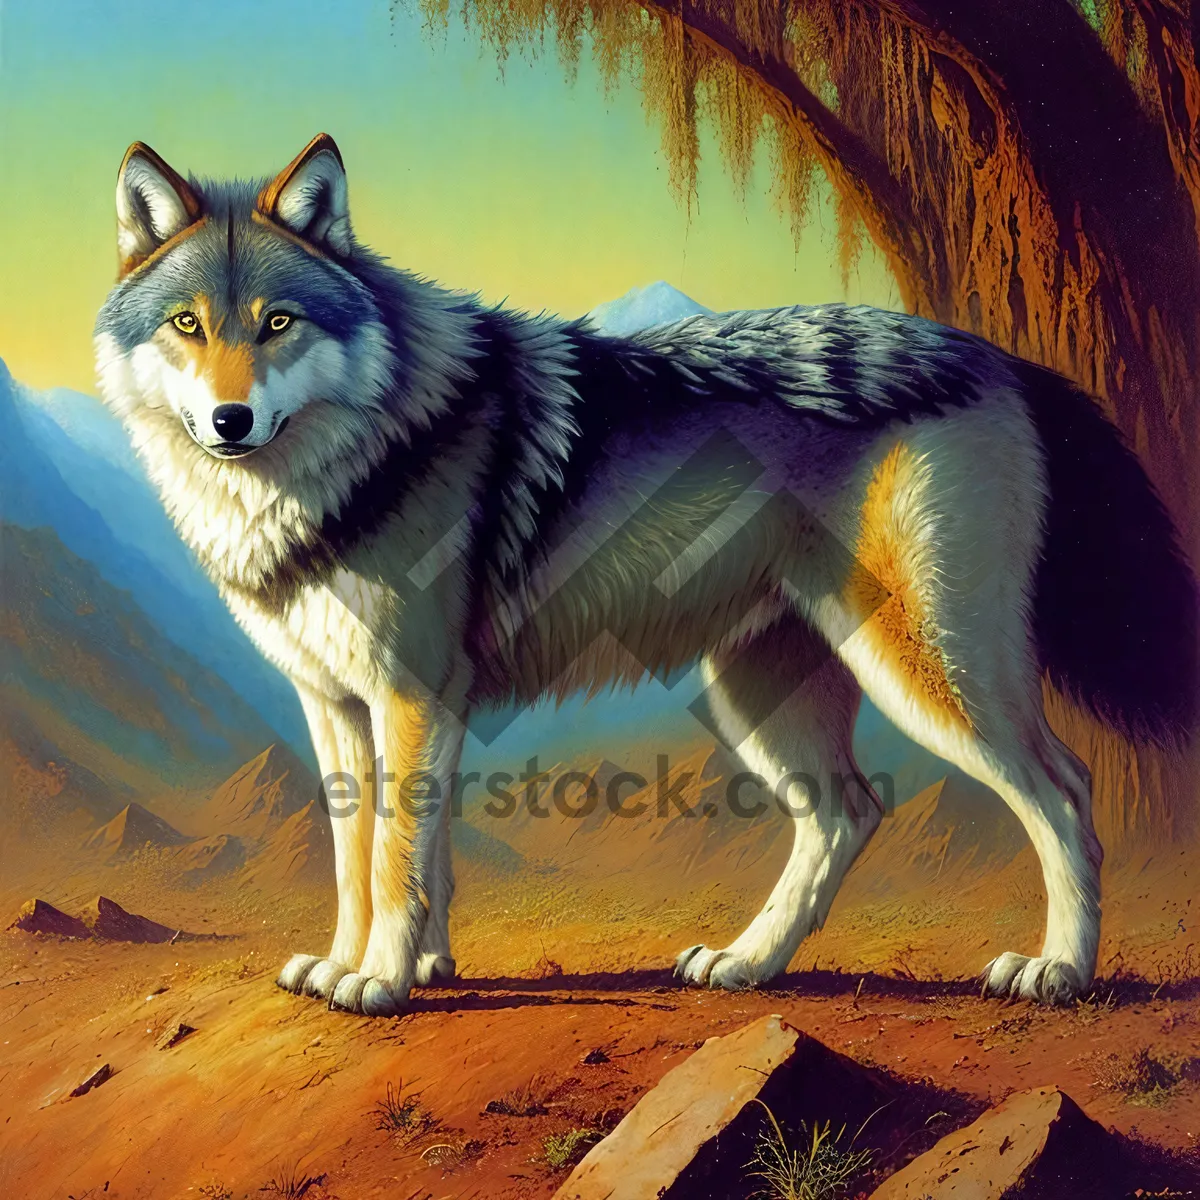 Picture of Wild Canine with Intense Gaze: Timber Wolf